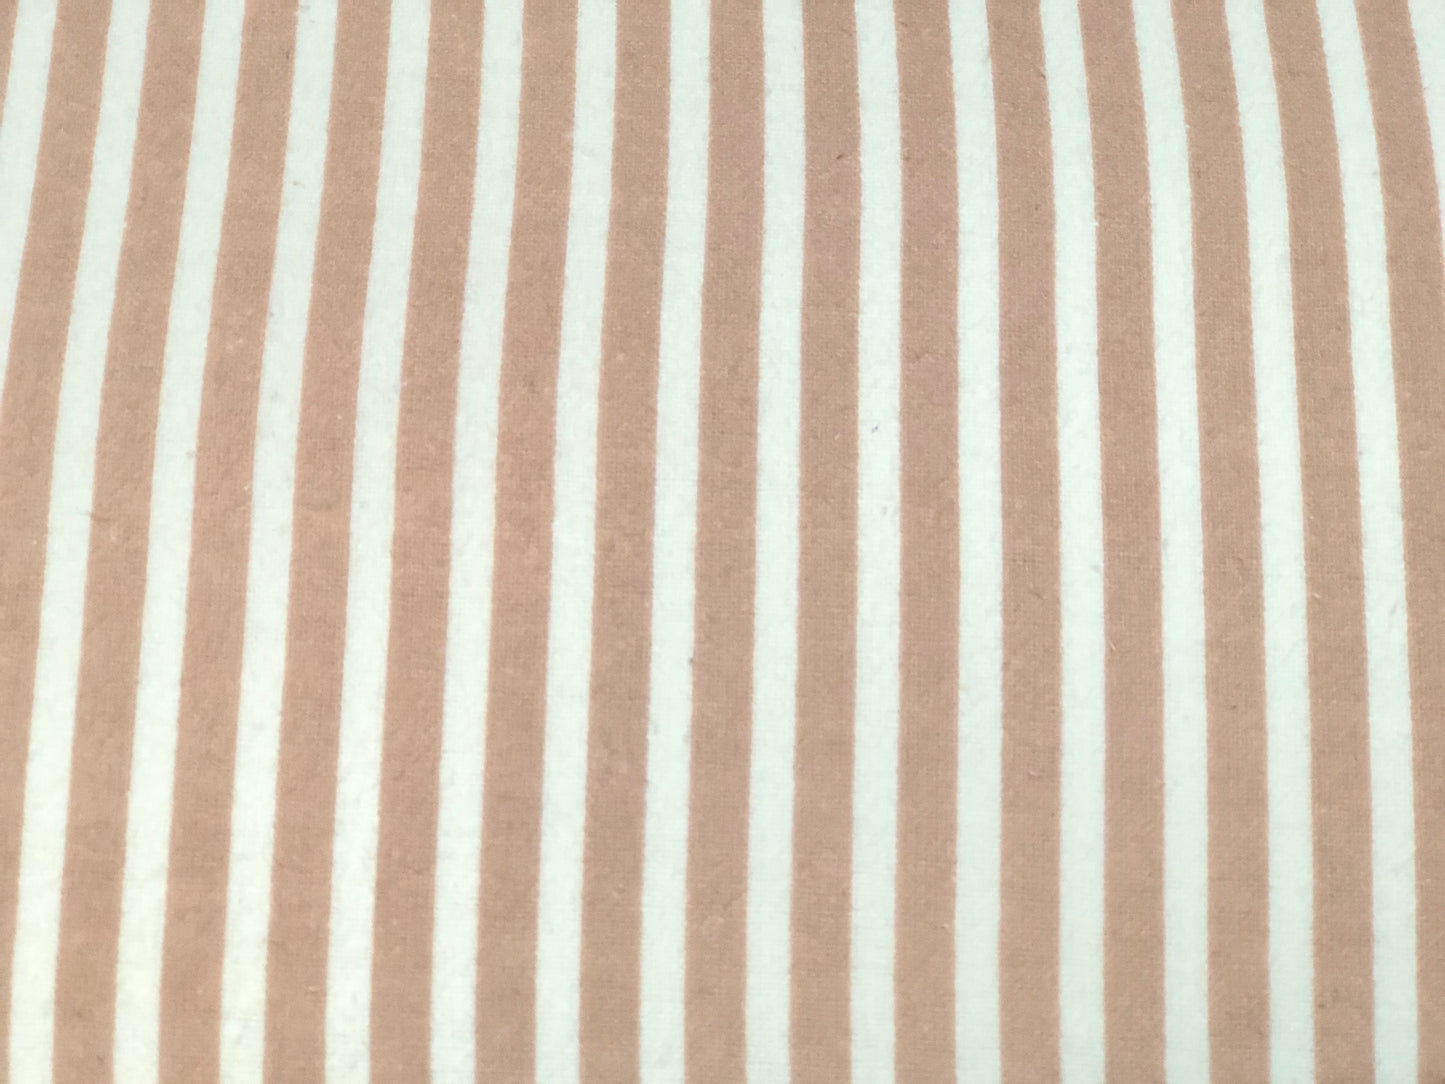 Flannel 2583- Dusty pink with white stripes